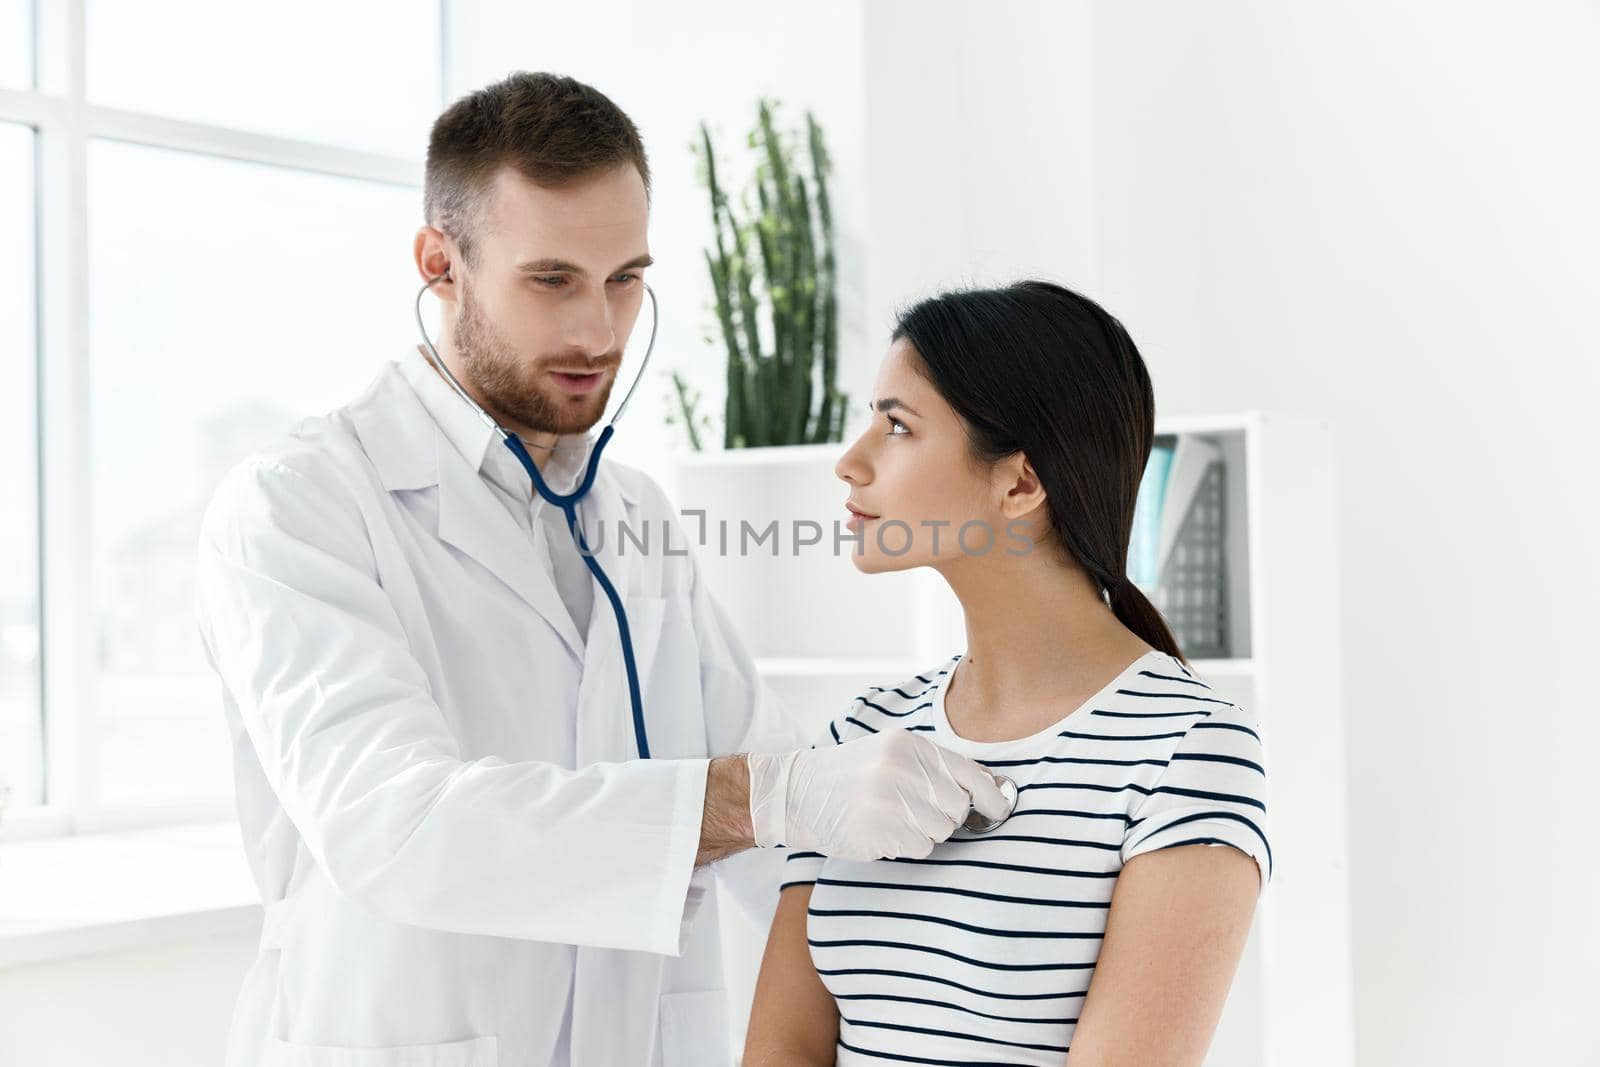 male doctor with a stethoscope examining a patient. High quality photo